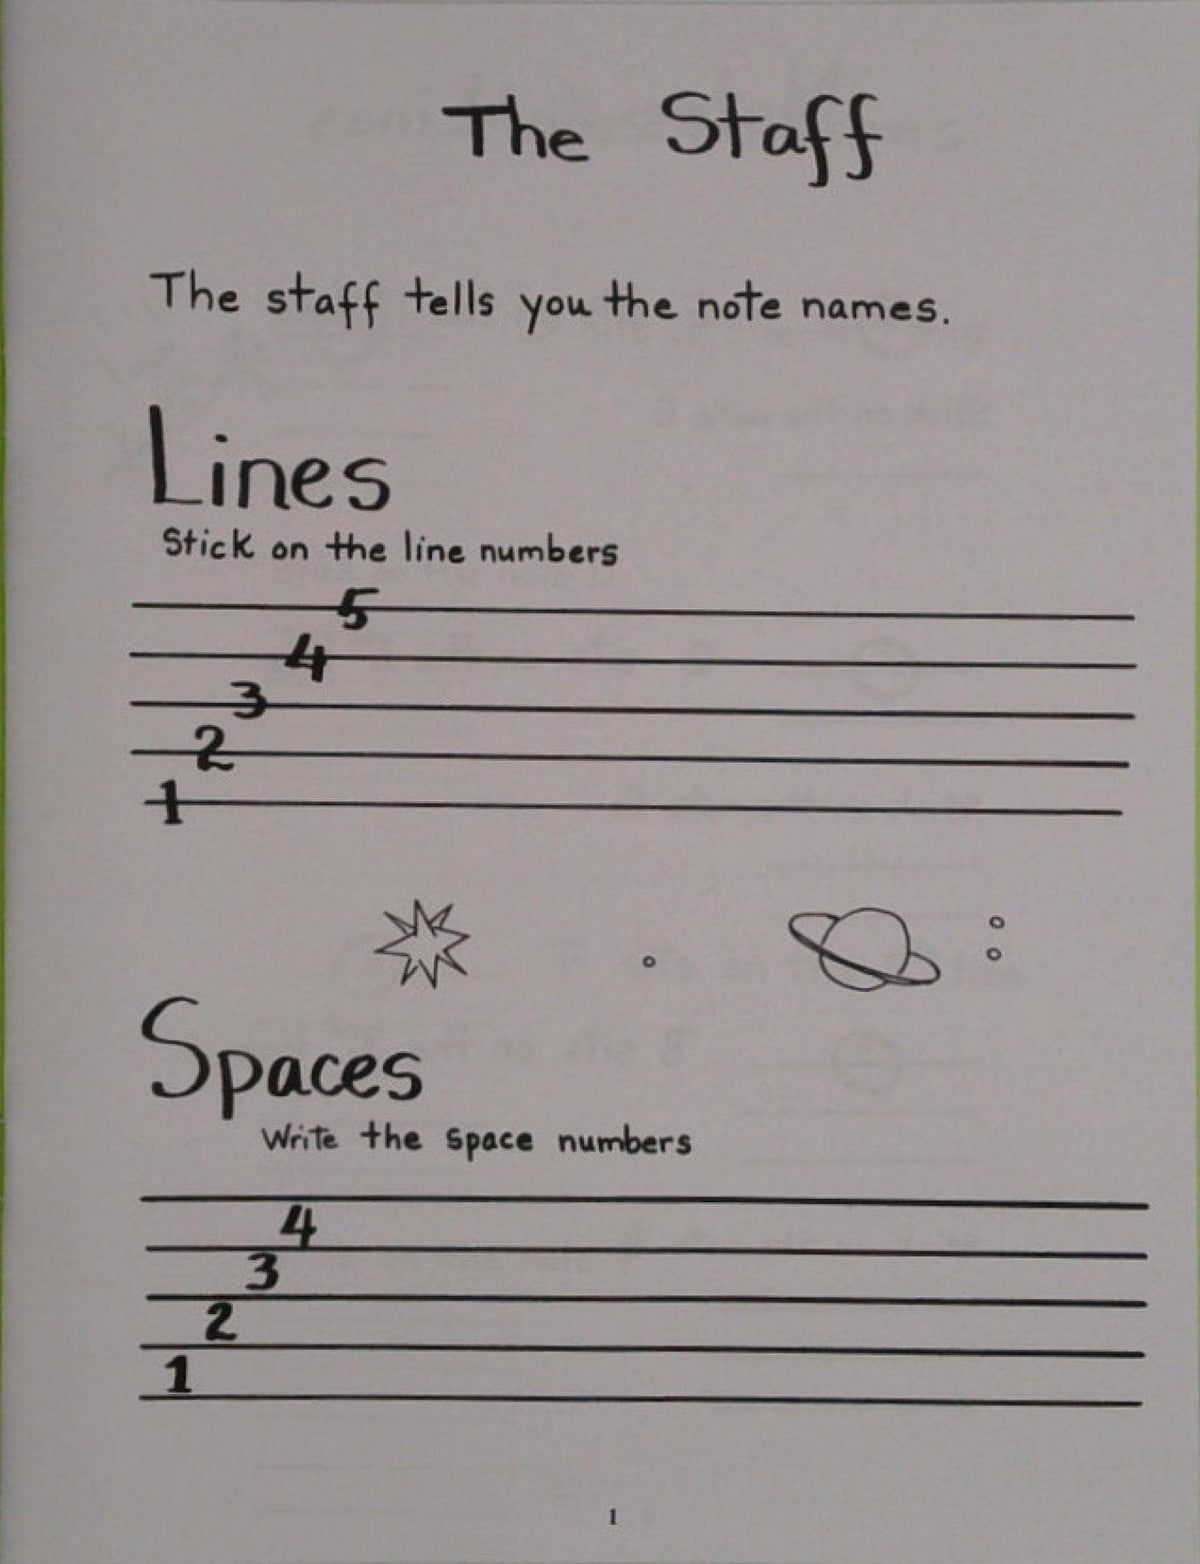 Fun With Notes - Practice Book for Strings by Evelyn Avsharian - Digital Download